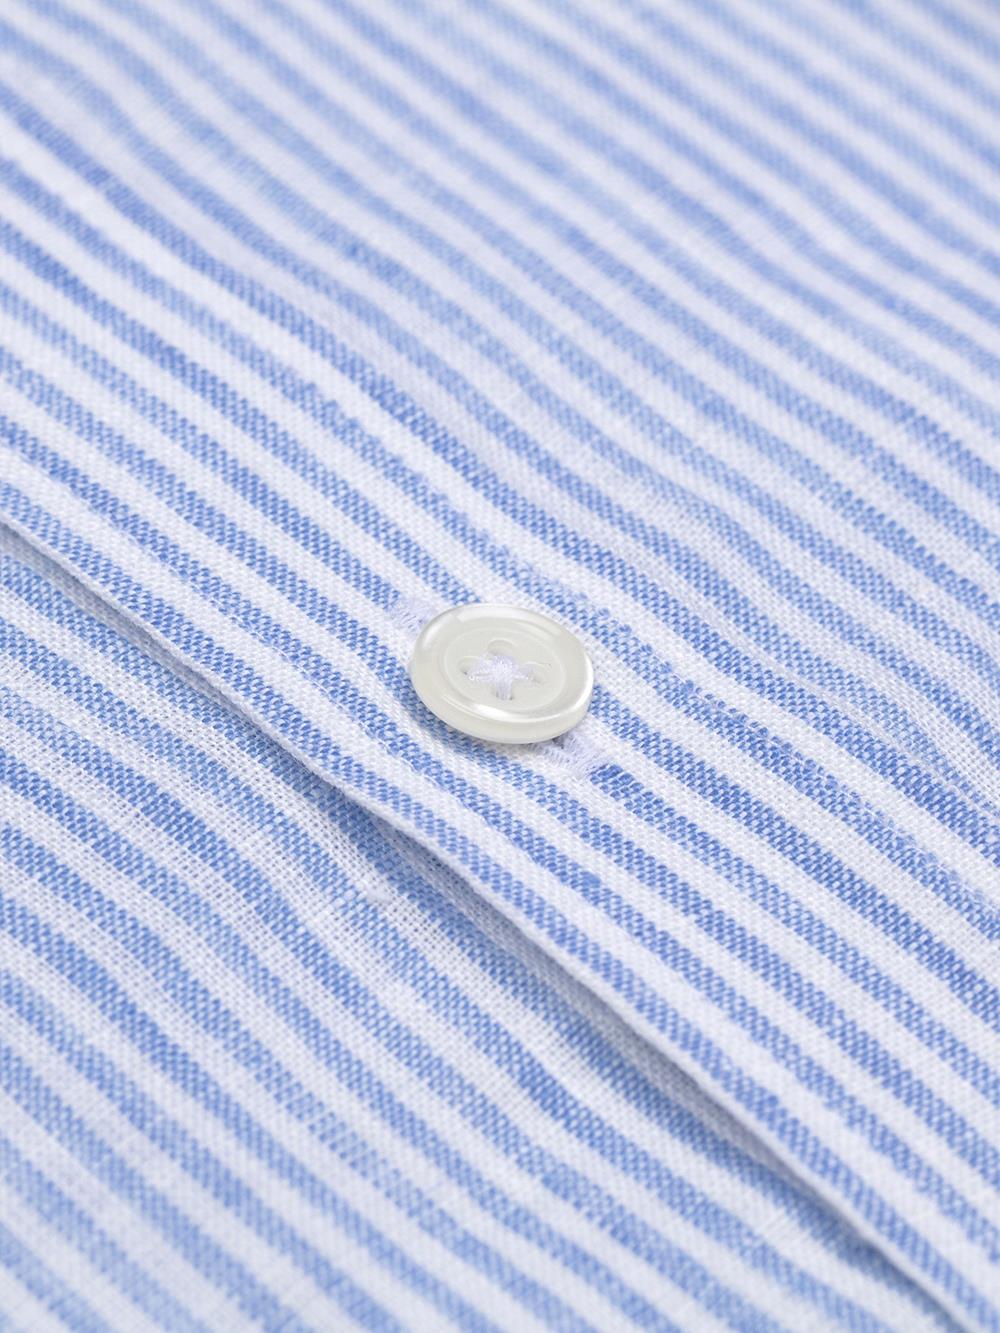 Randy shirt in linen with sky blue stripes